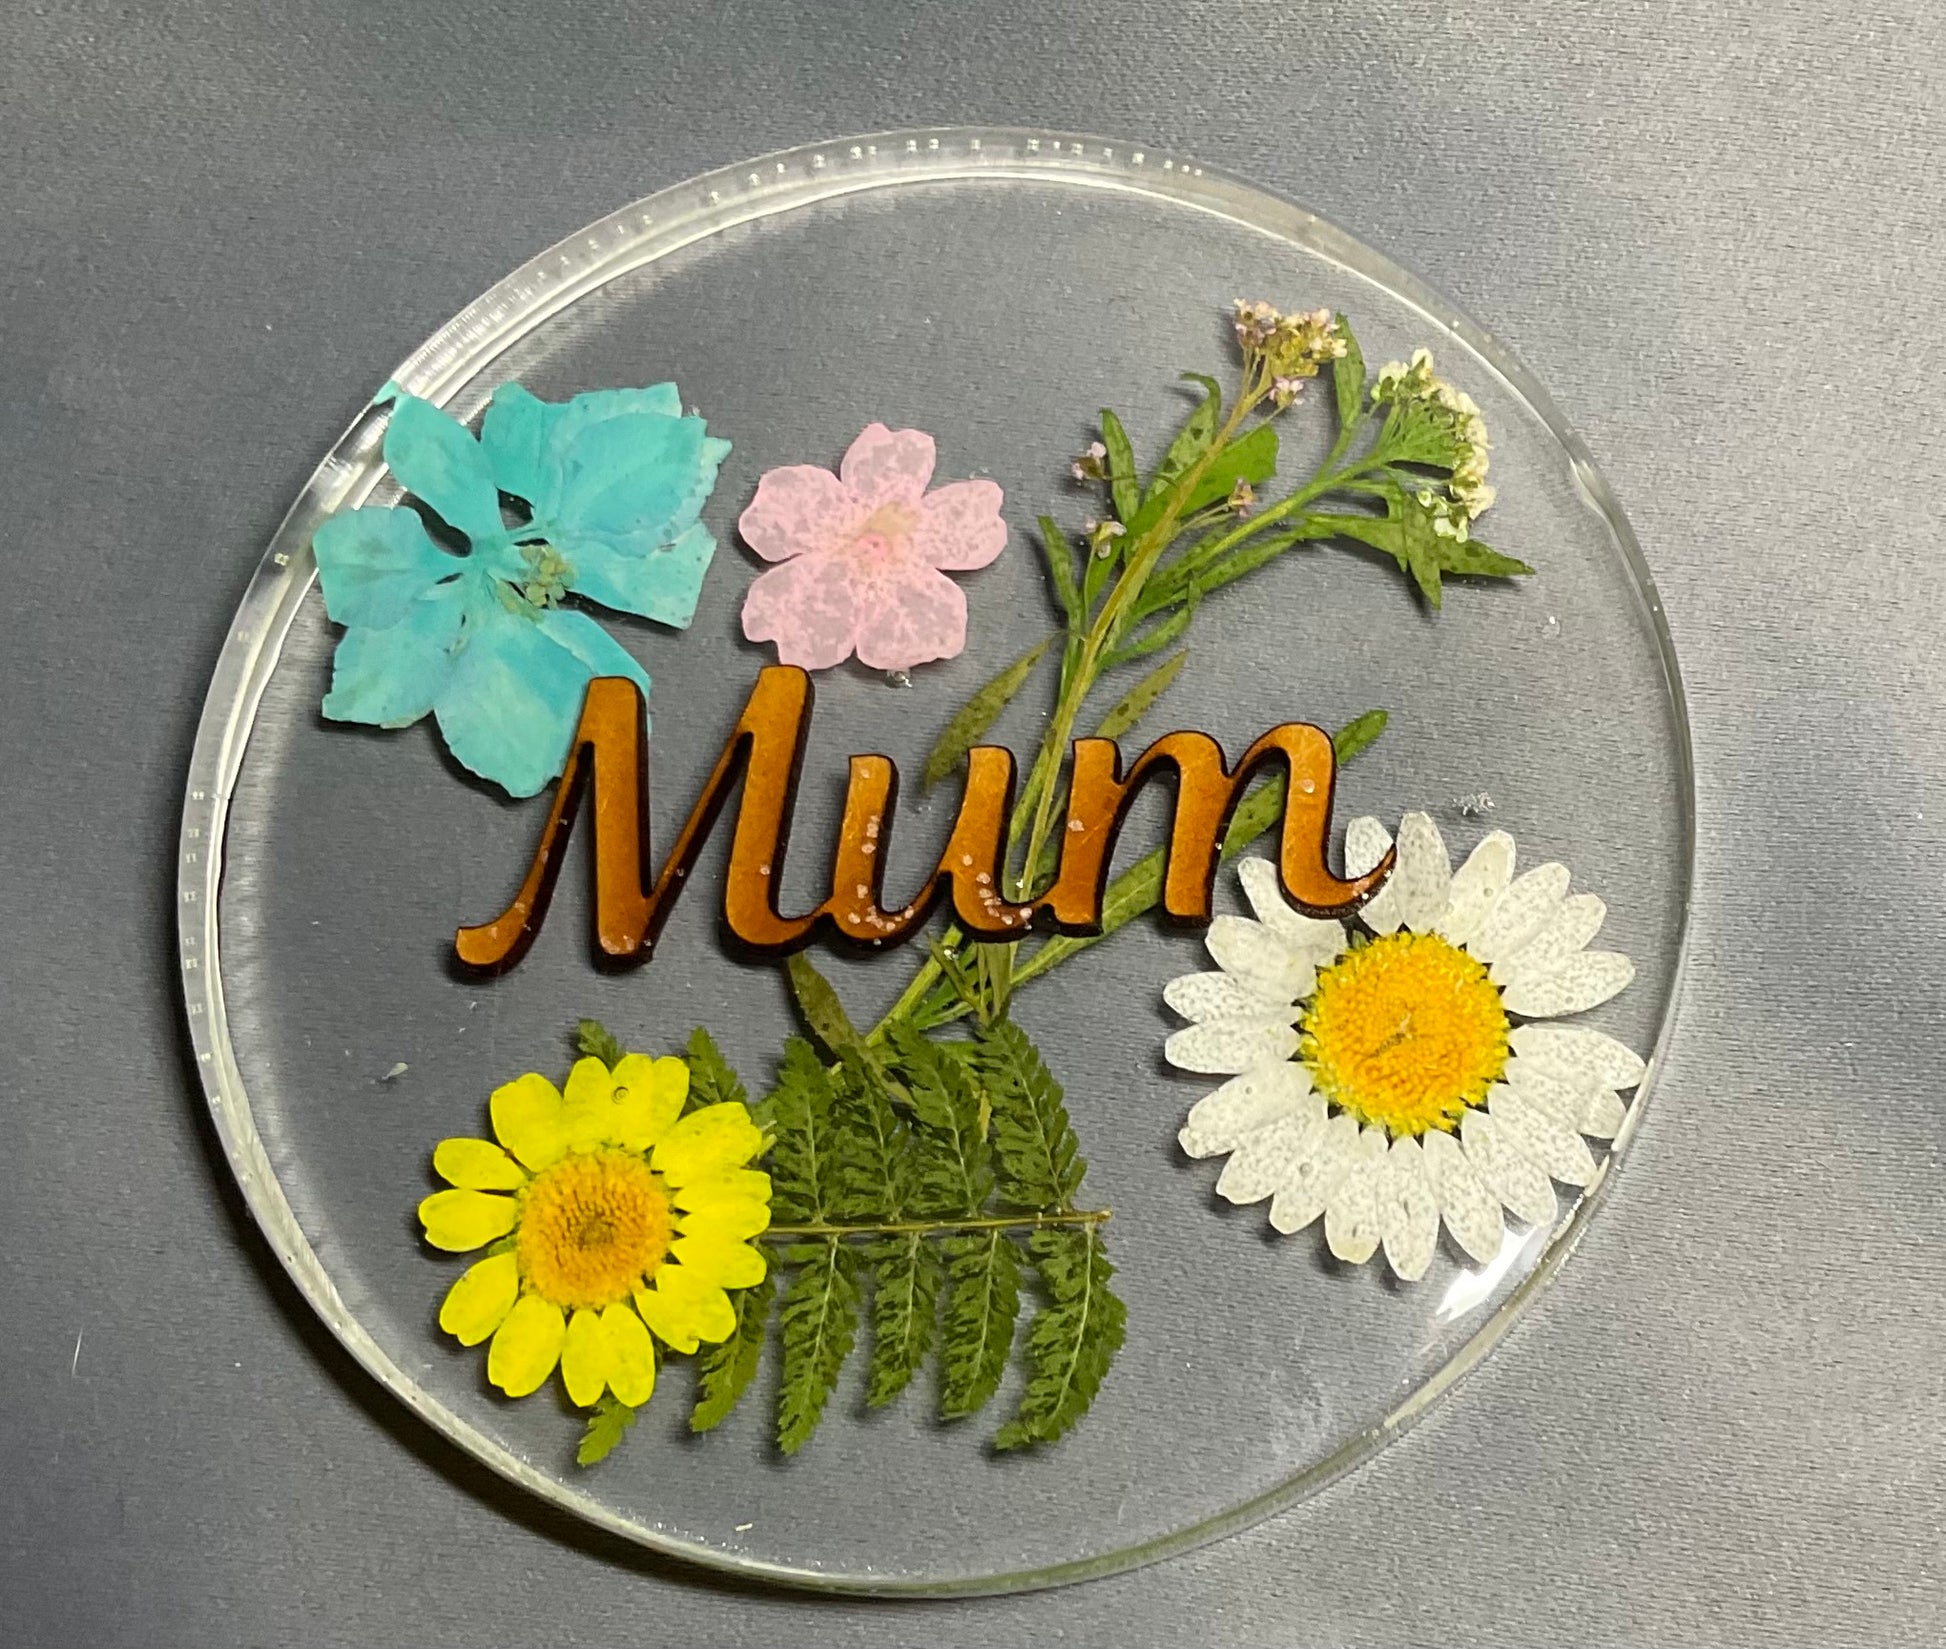 womens floral coaster, flower coaster, personalised coaster featuring a sepection of flowers, foliage and name of your choice, mum coaster